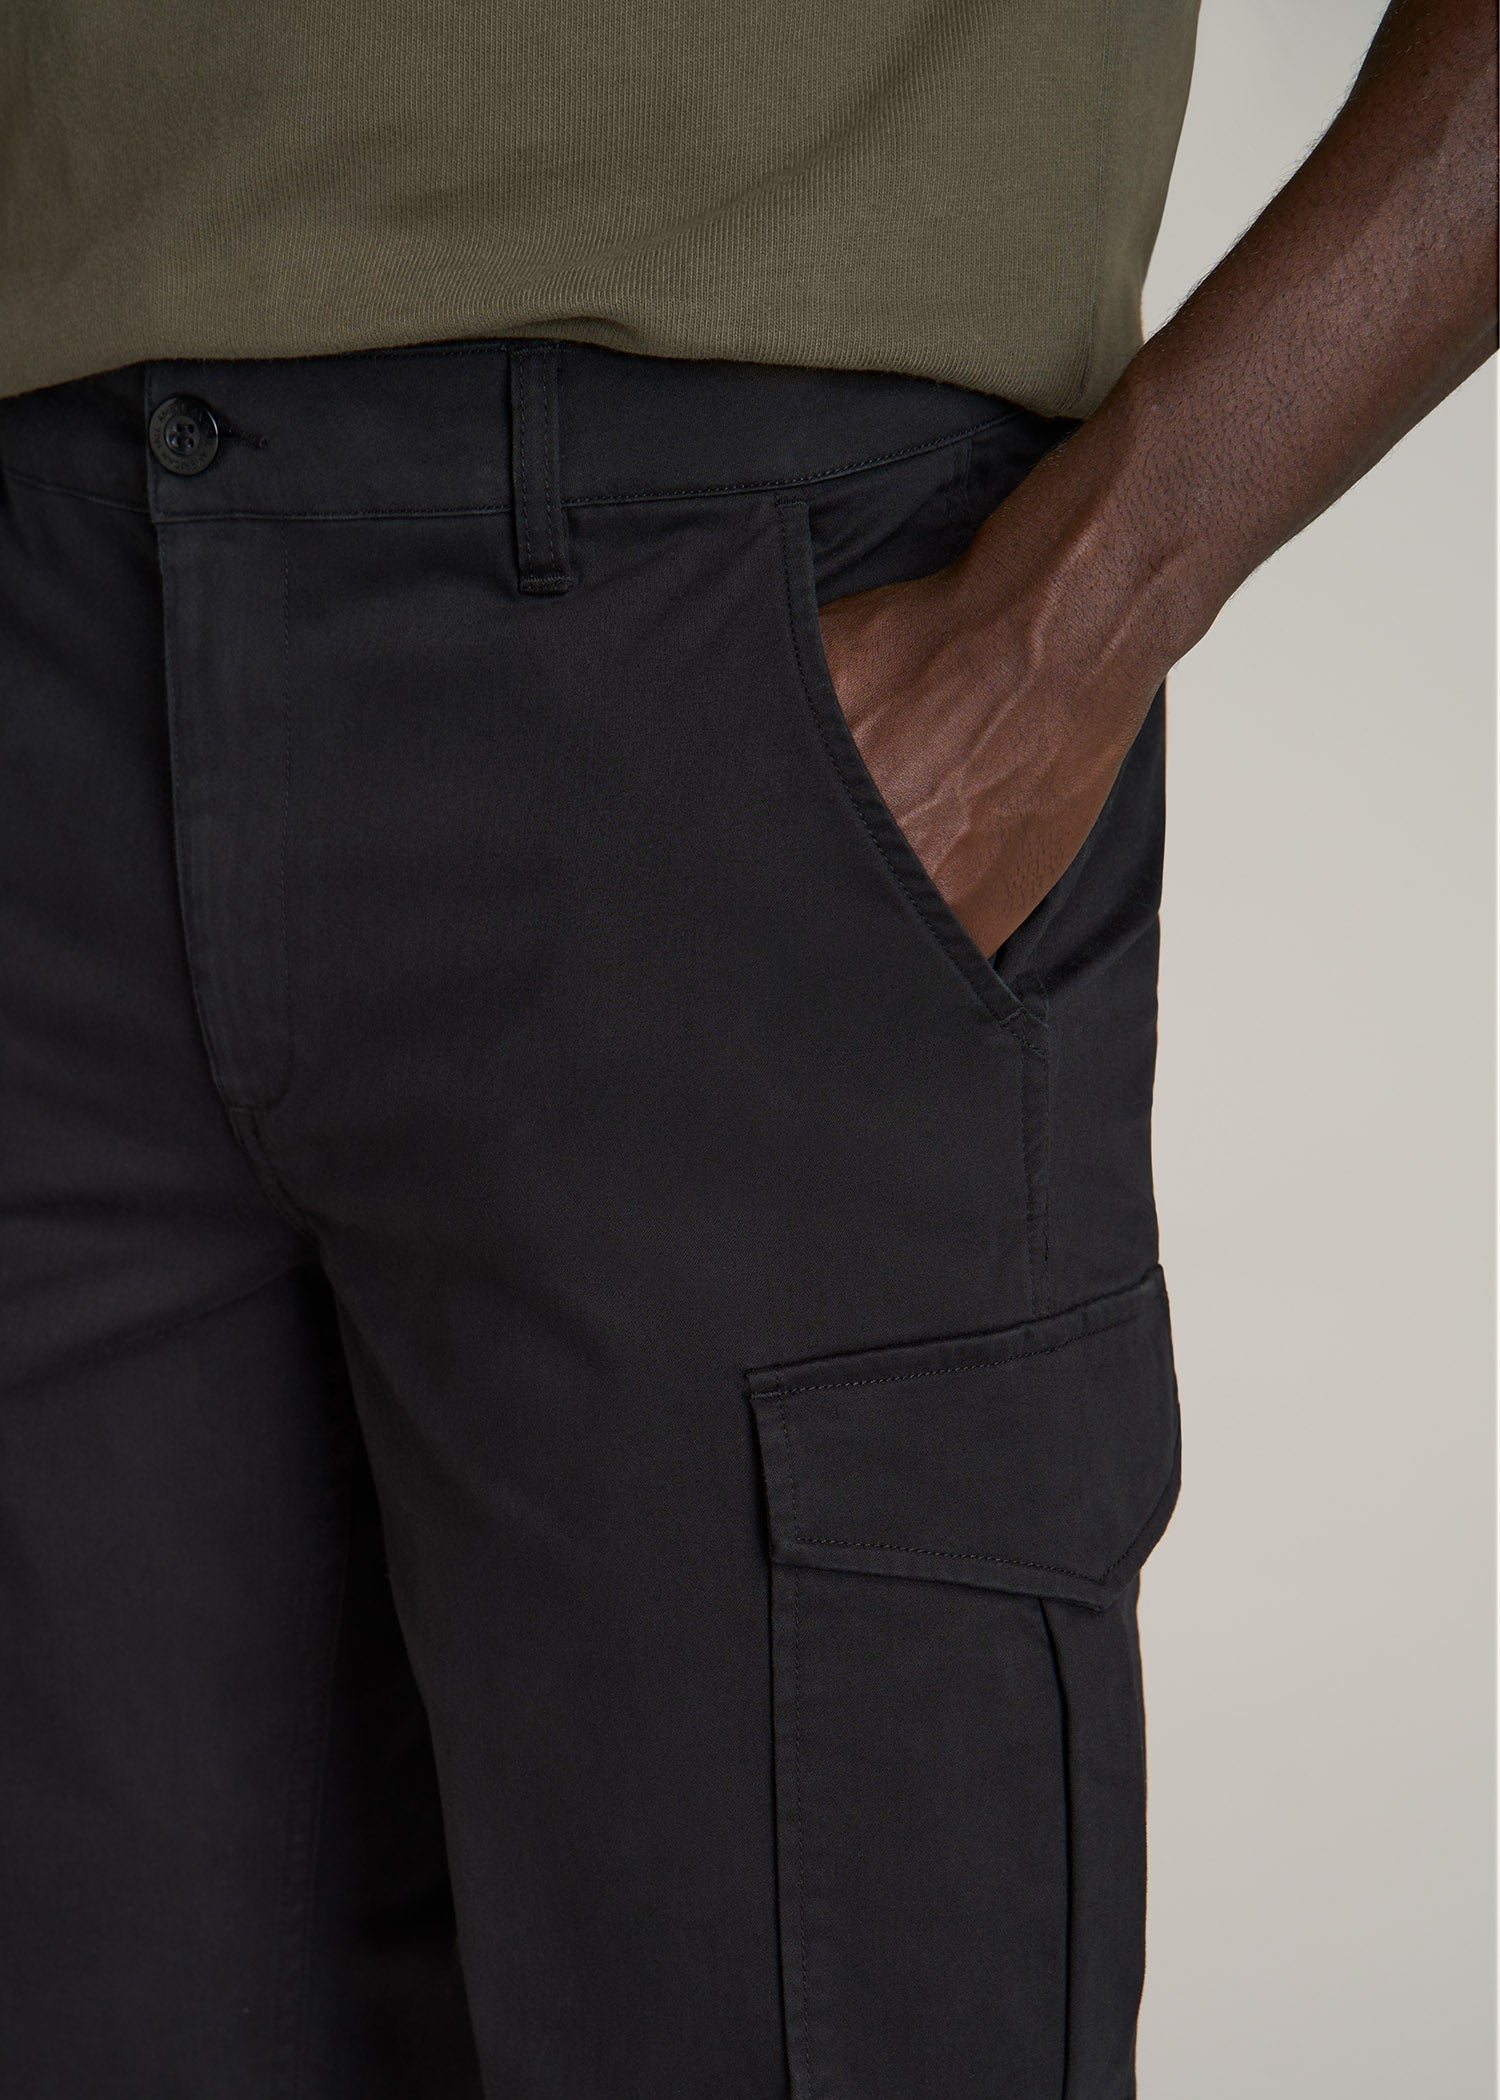 TAPERED-FIT Stretch Cotton Cargo Jogger Pants for Tall Men in Black